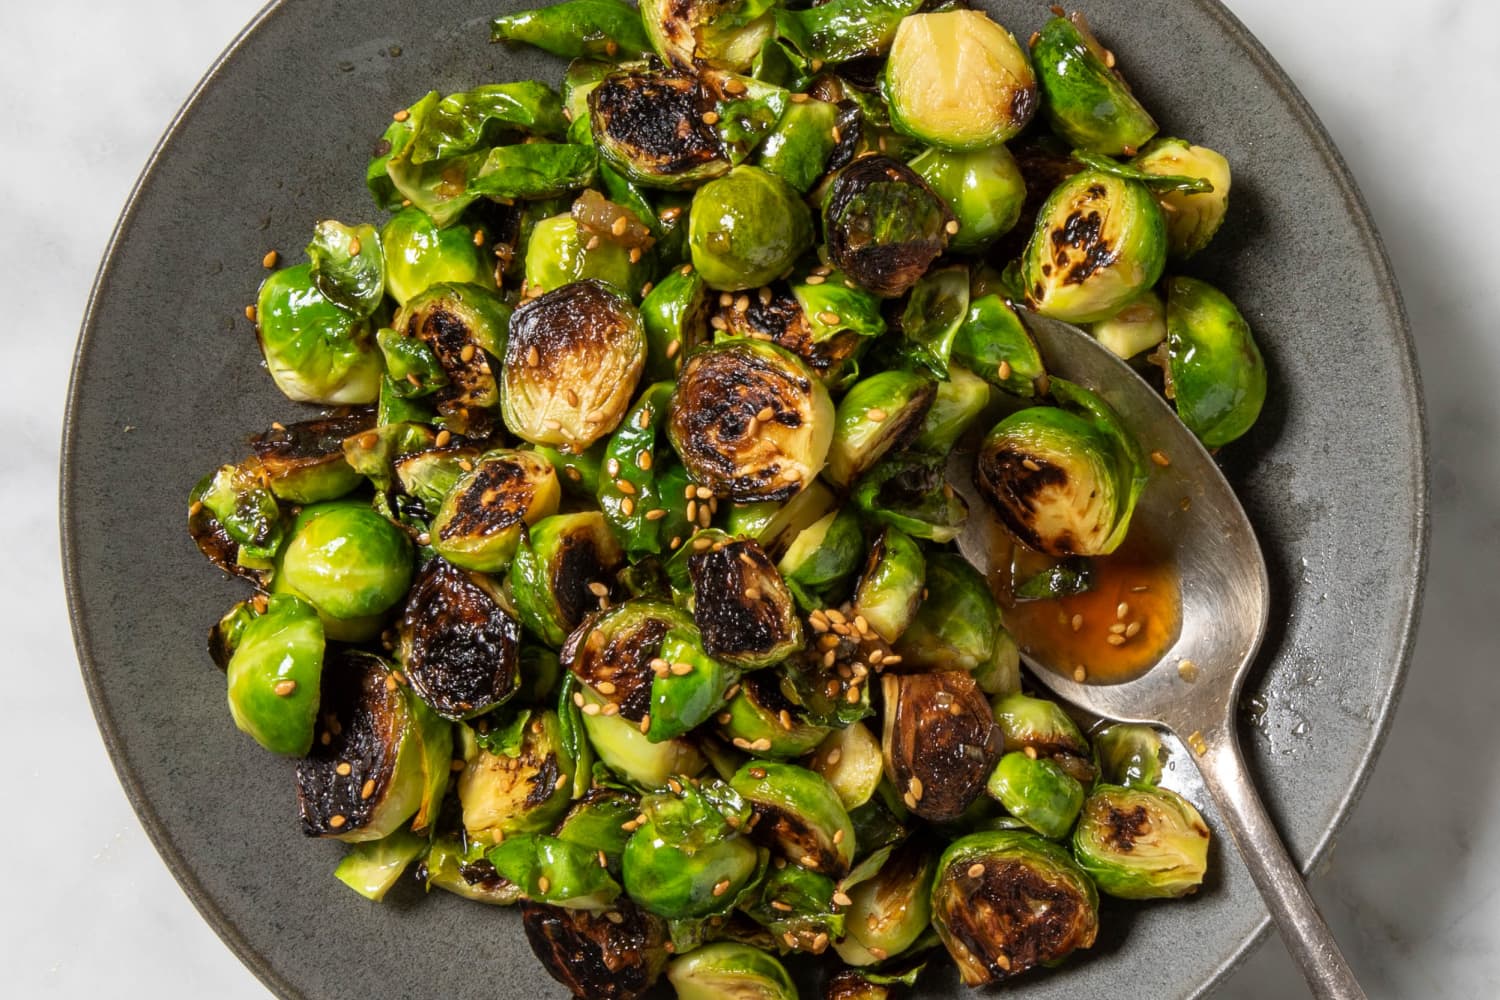 Fish Sauce, Caramel and Brussels Sprouts Recipe